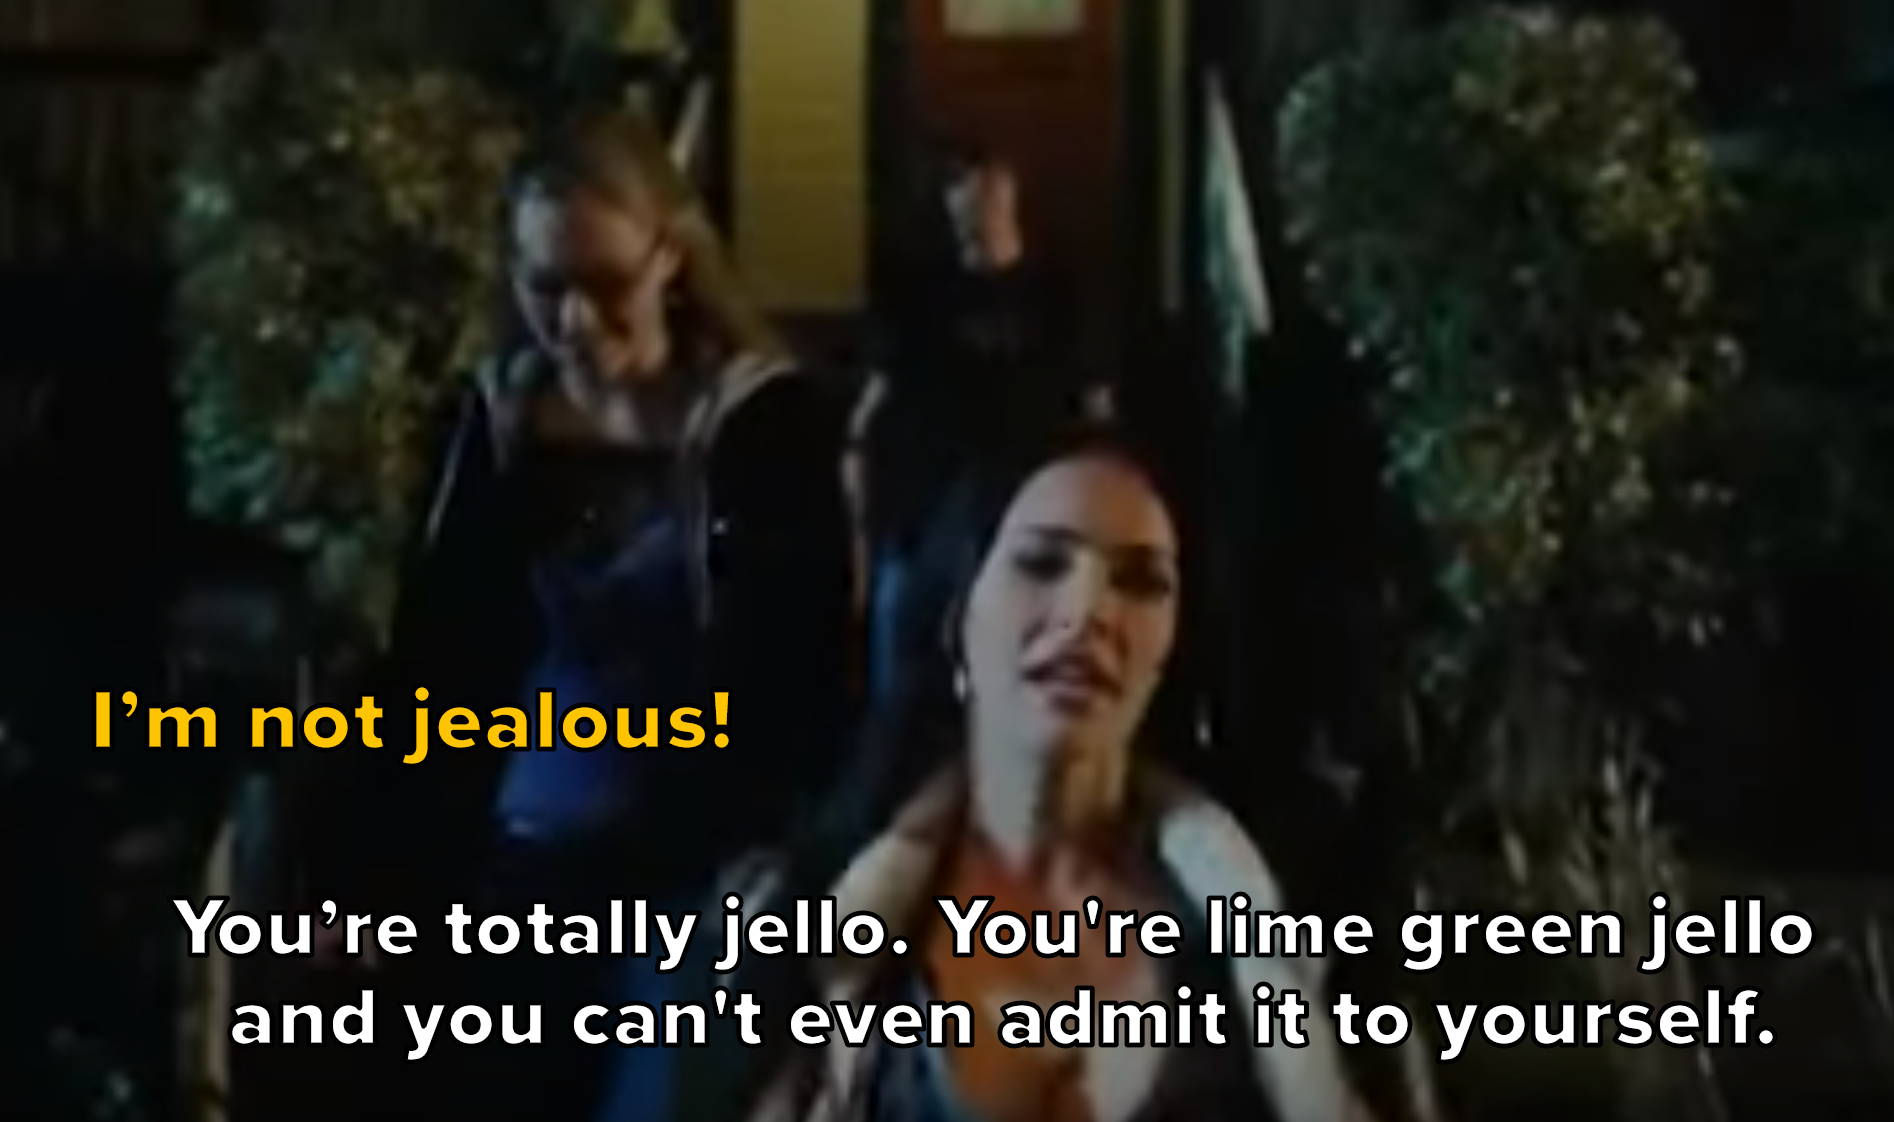 needy: I&#x27;m not jealous. Jennifer: You&#x27;re totally jello. You&#x27;re lime green jello and you can&#x27;t even admit it to yourself.